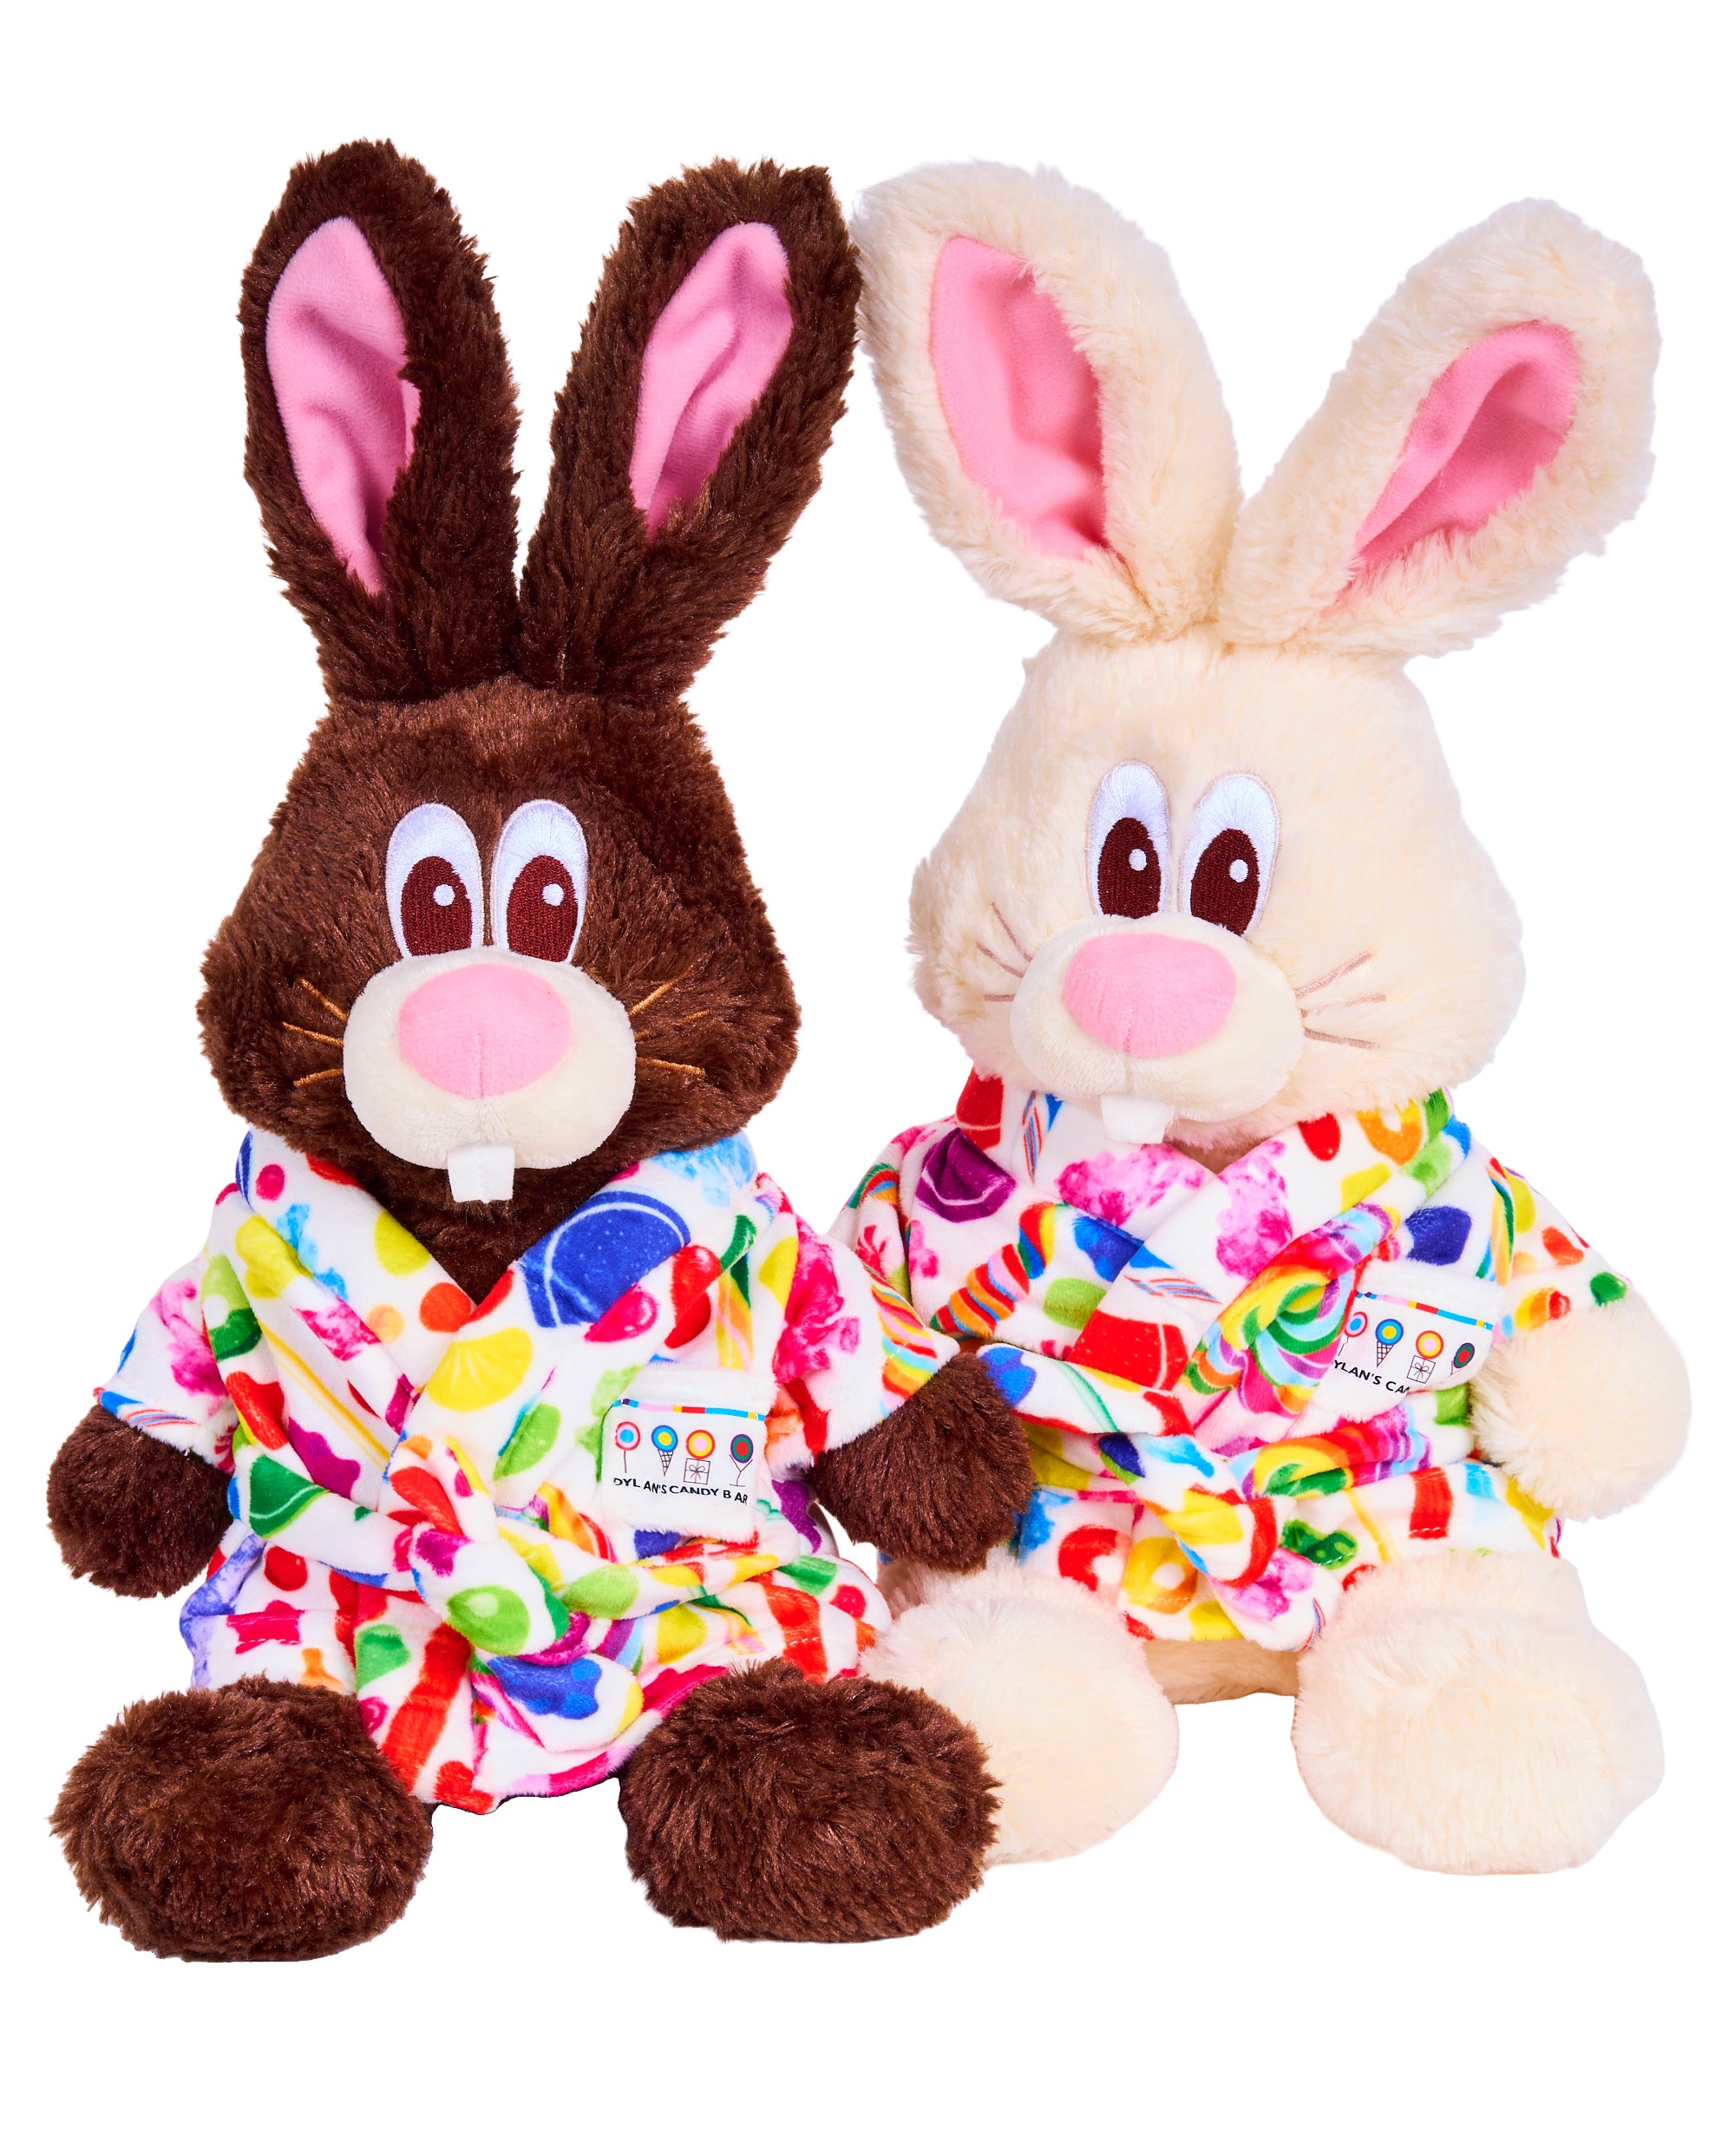 dylanLiving the Sweet Life: Chocolate the Bunny - Dylan's Candy Bar 5504円